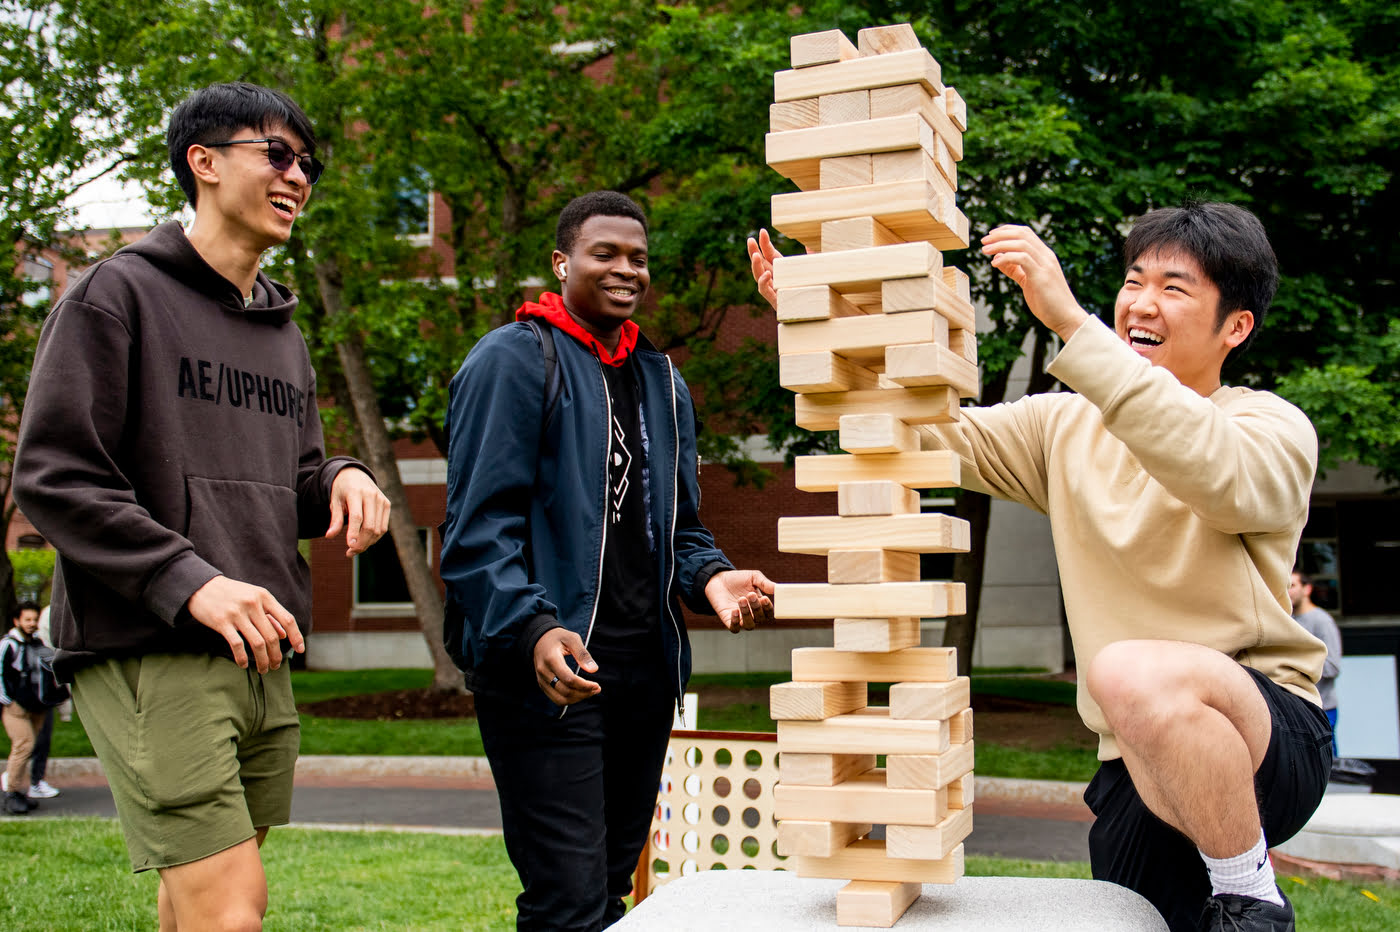 Giant Jenga Review: A Fun and Exciting Game for All Ages